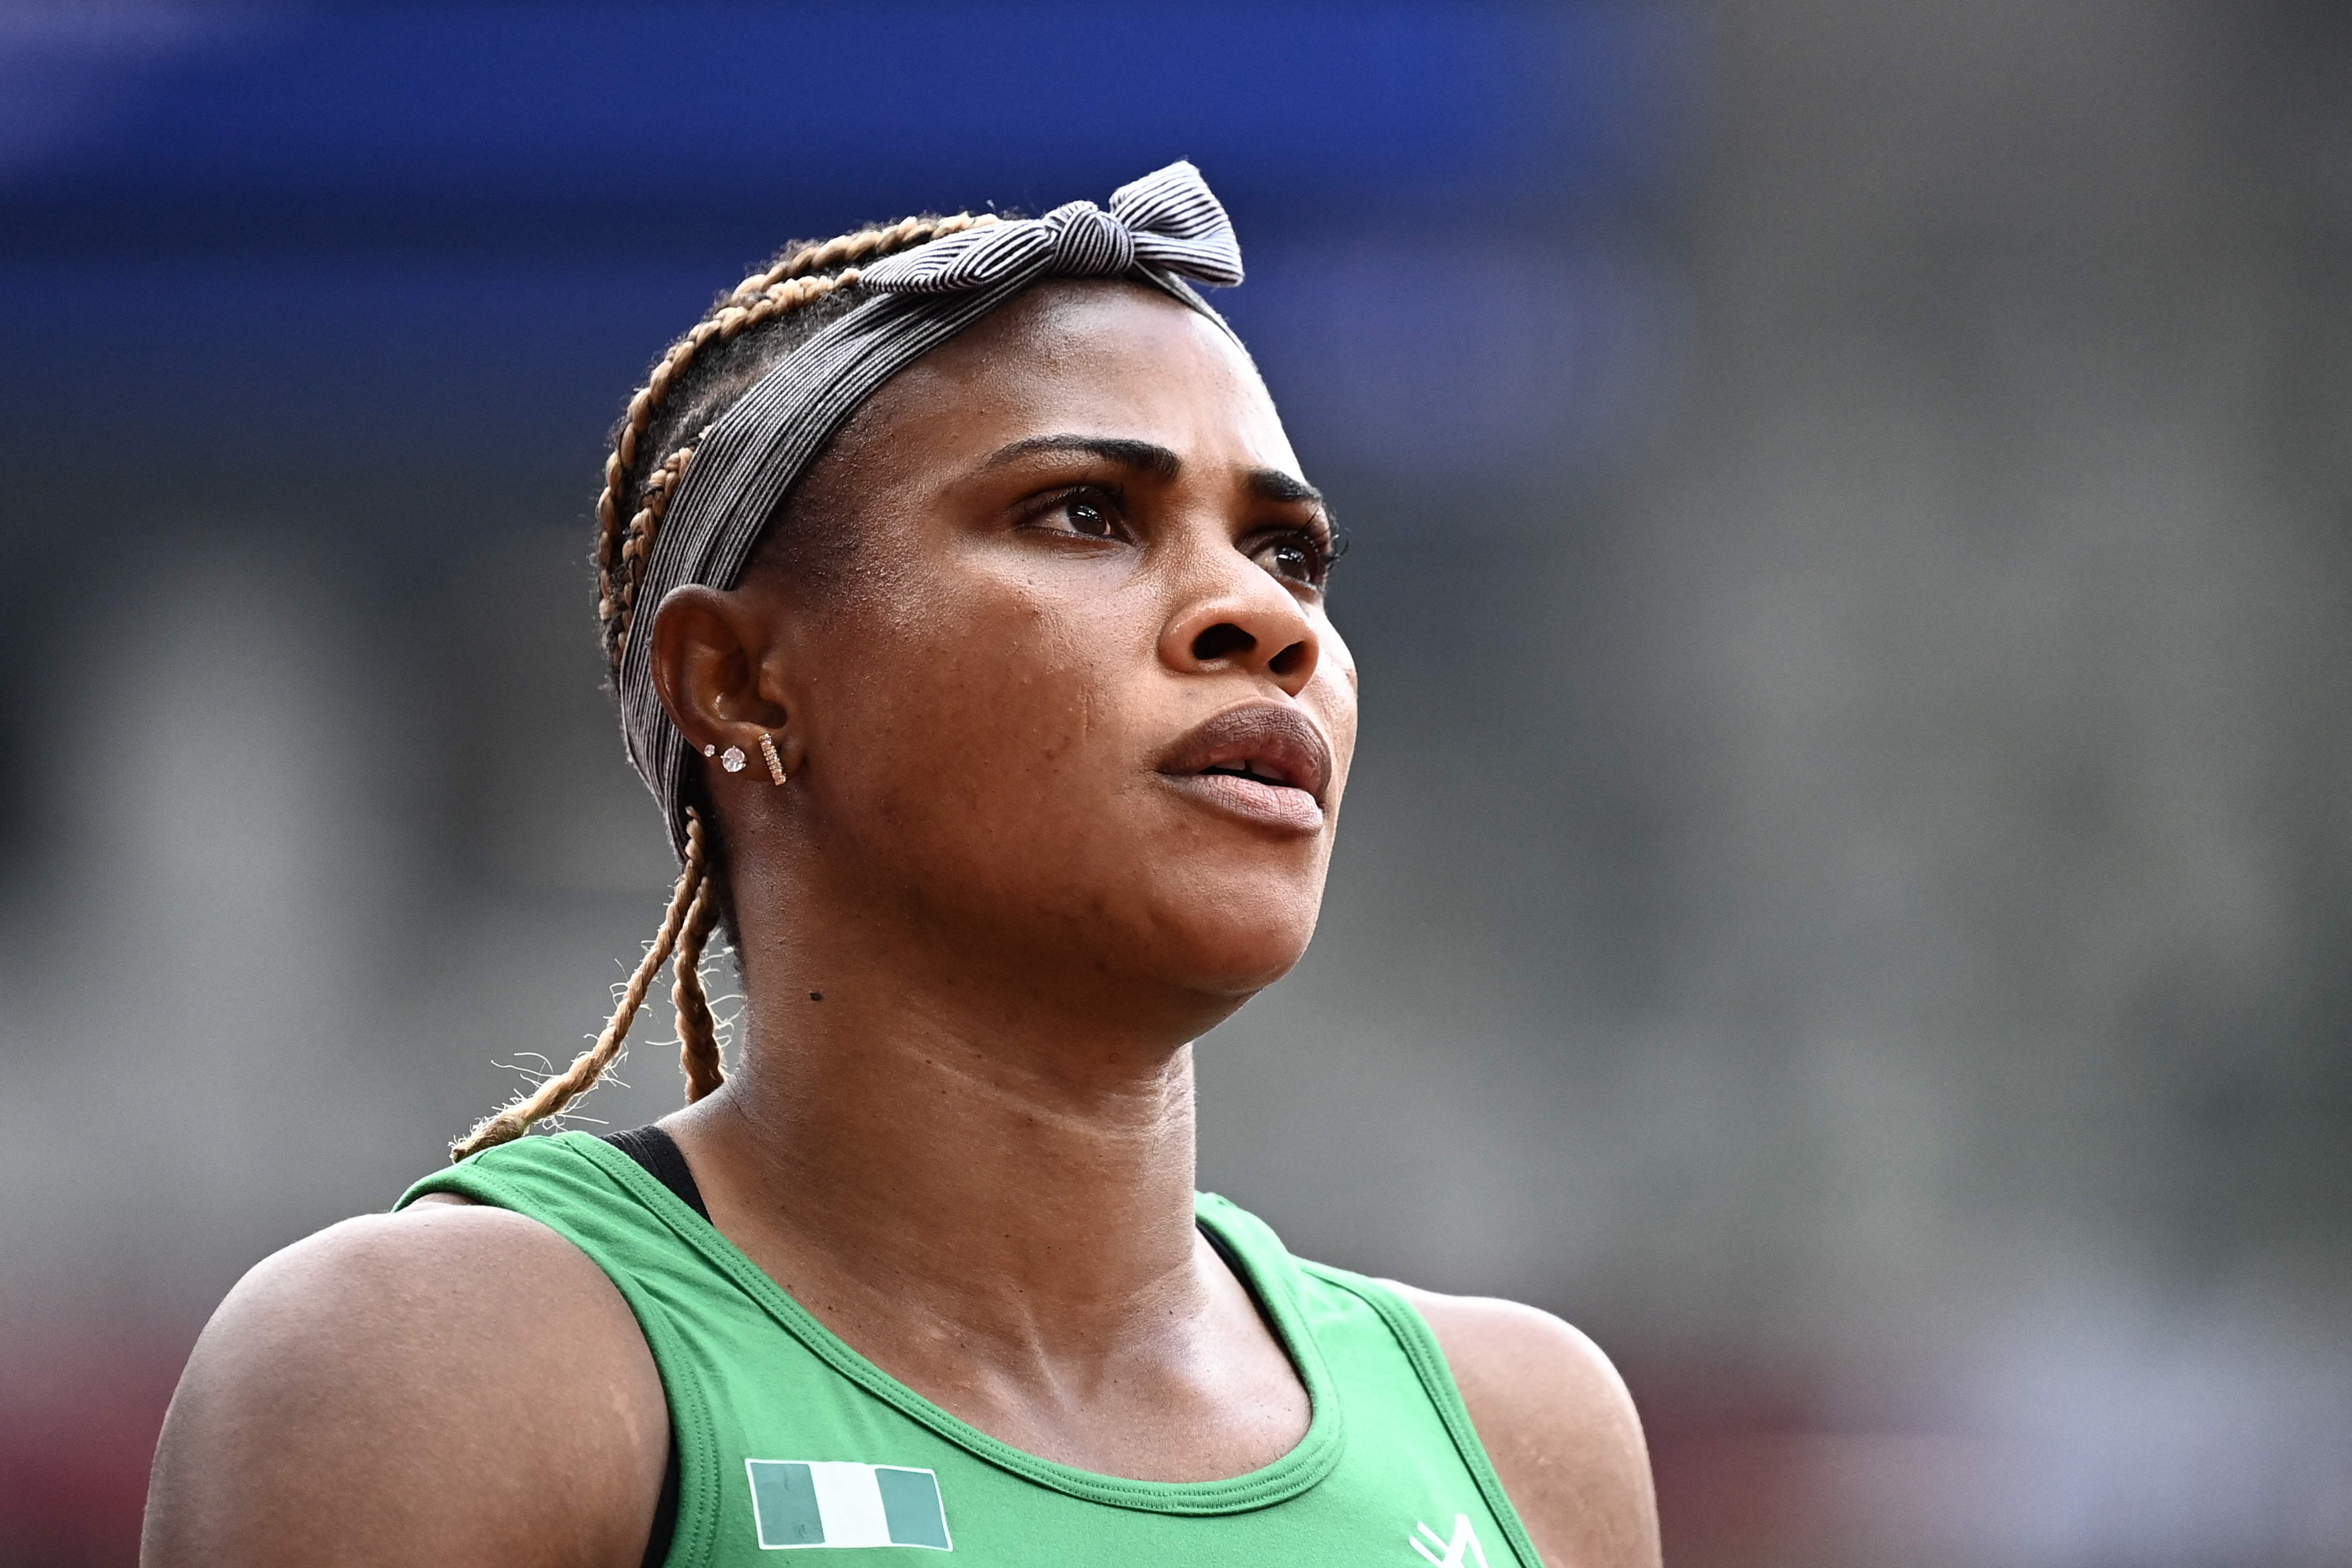 Blessing Okagbare ran in the women’s 100m during the heats in Tokyo